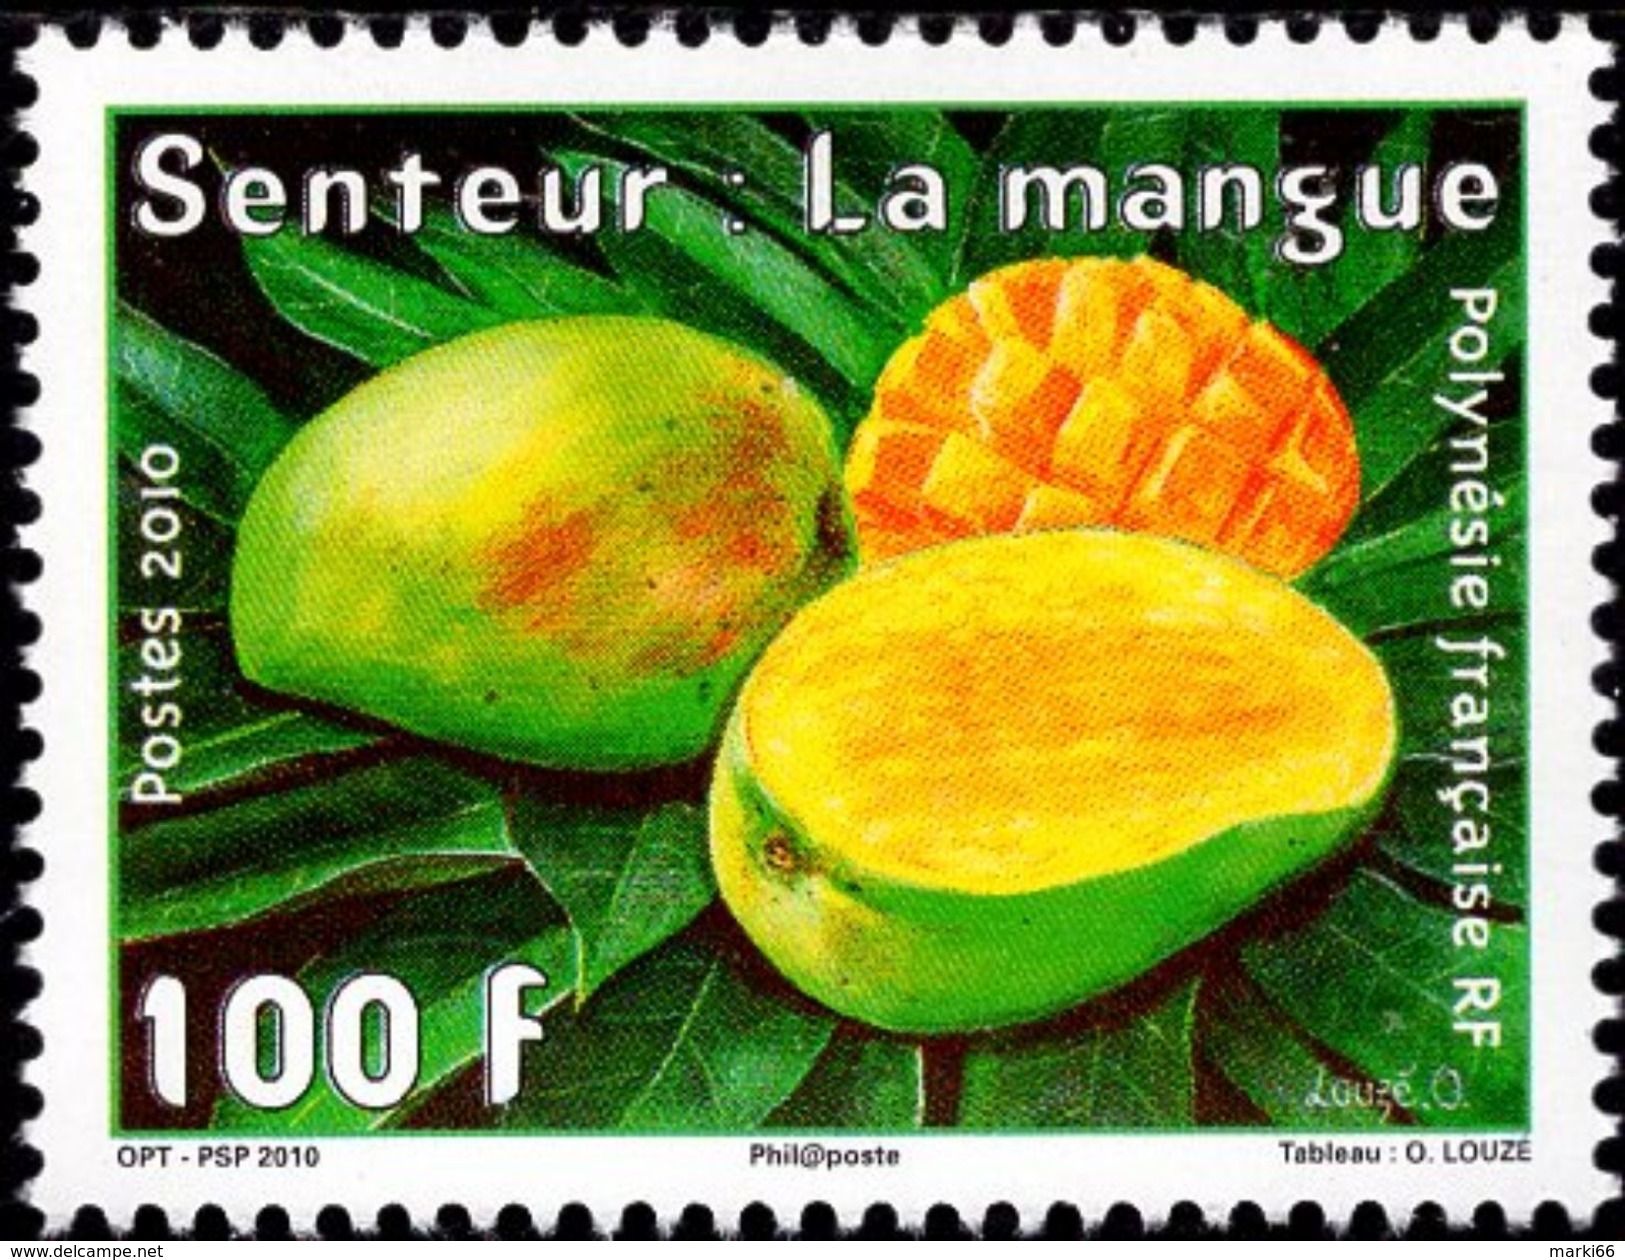 French Polynesia - 2010 - Fruits - Mango - Mint Stamp With Scent Of Mango - Neufs